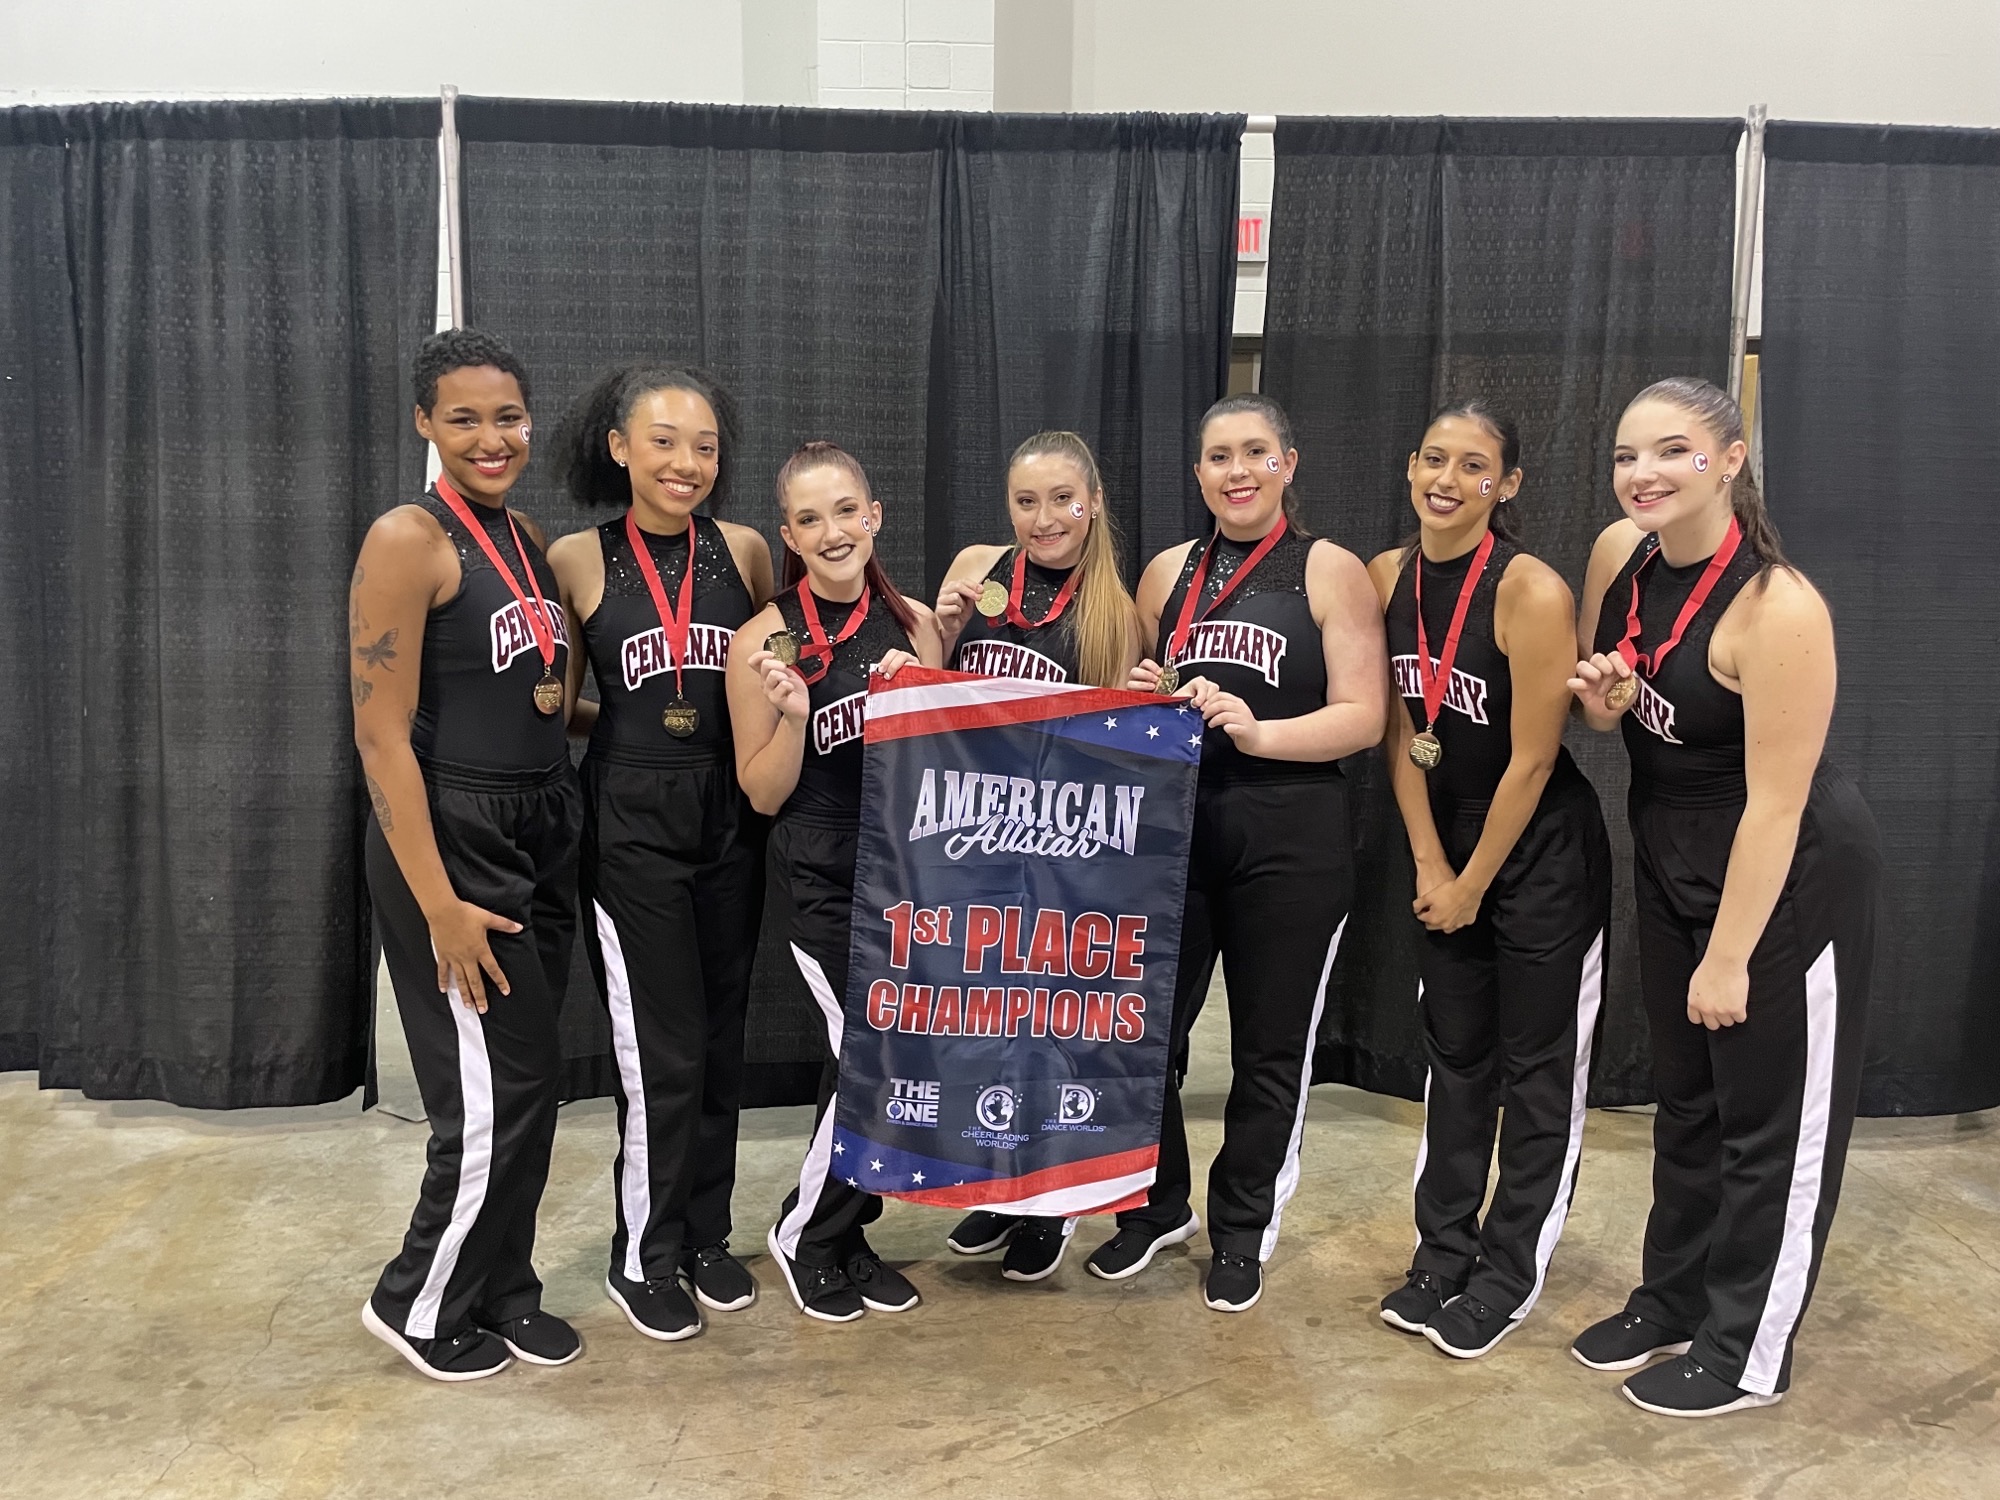 The Leading Ladies had an impressive day on Saturday at the American Allstar Competition.